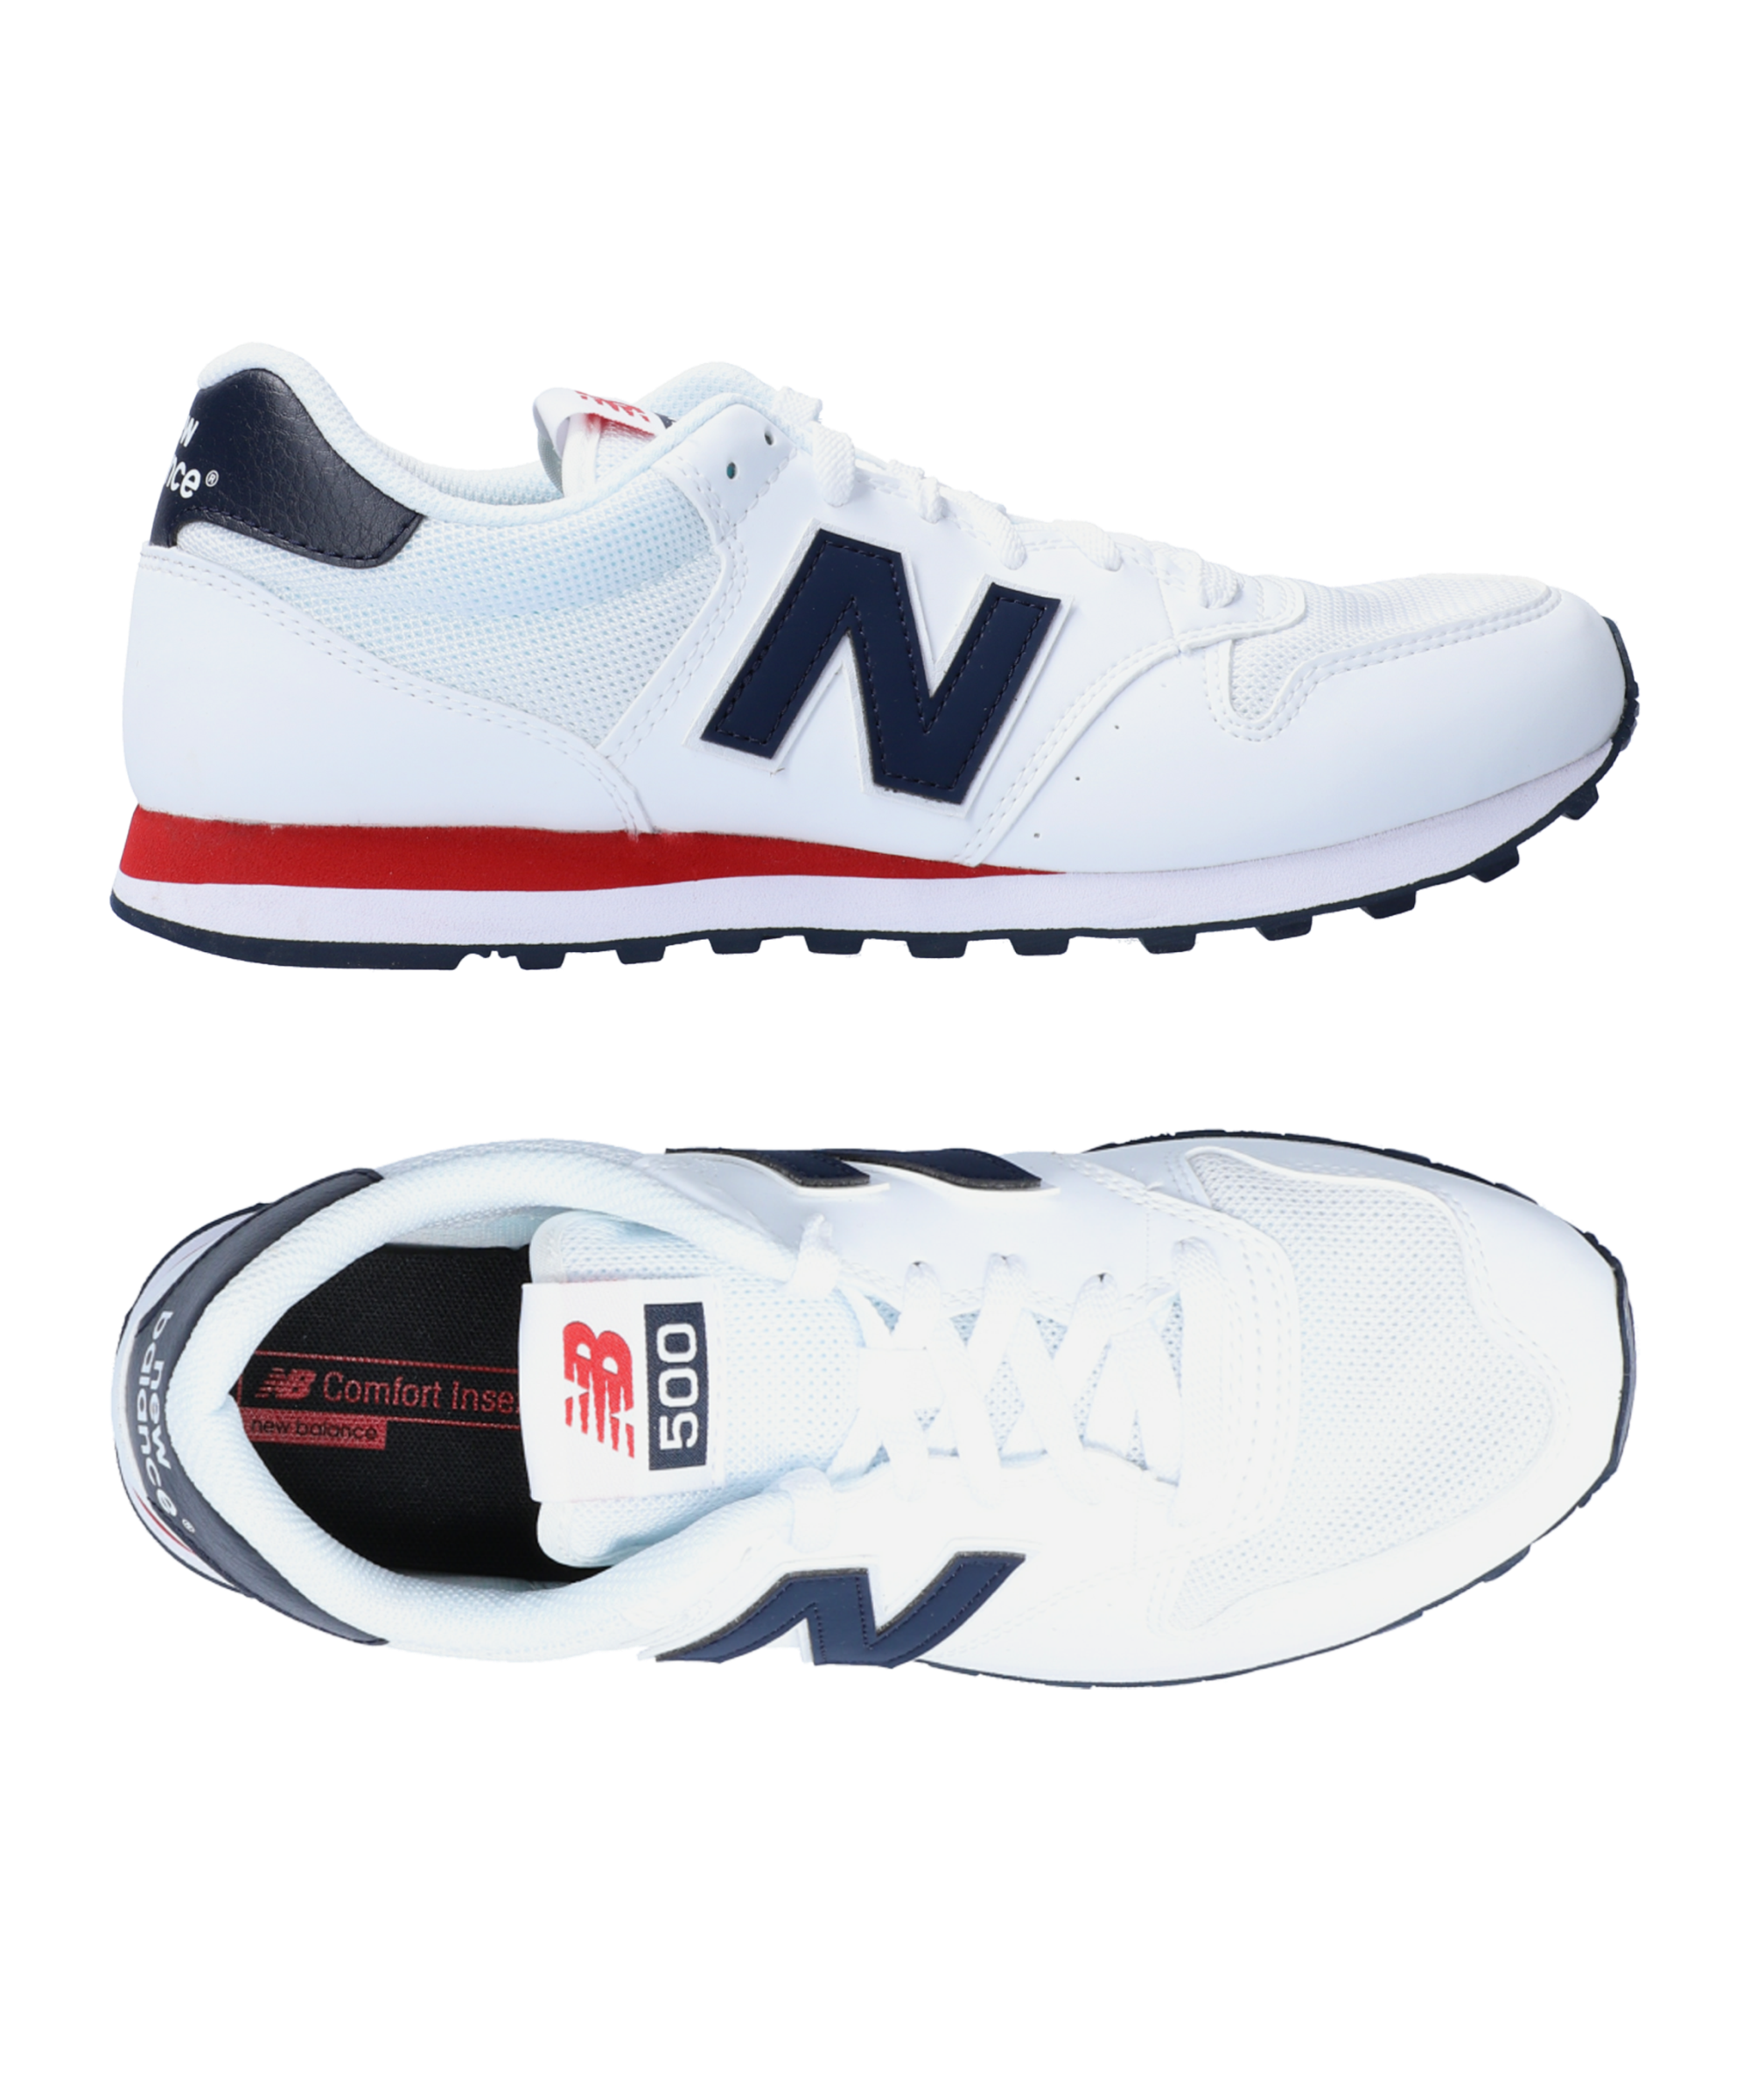 Thorny pipeline Out of date New Balance GM500 D - White